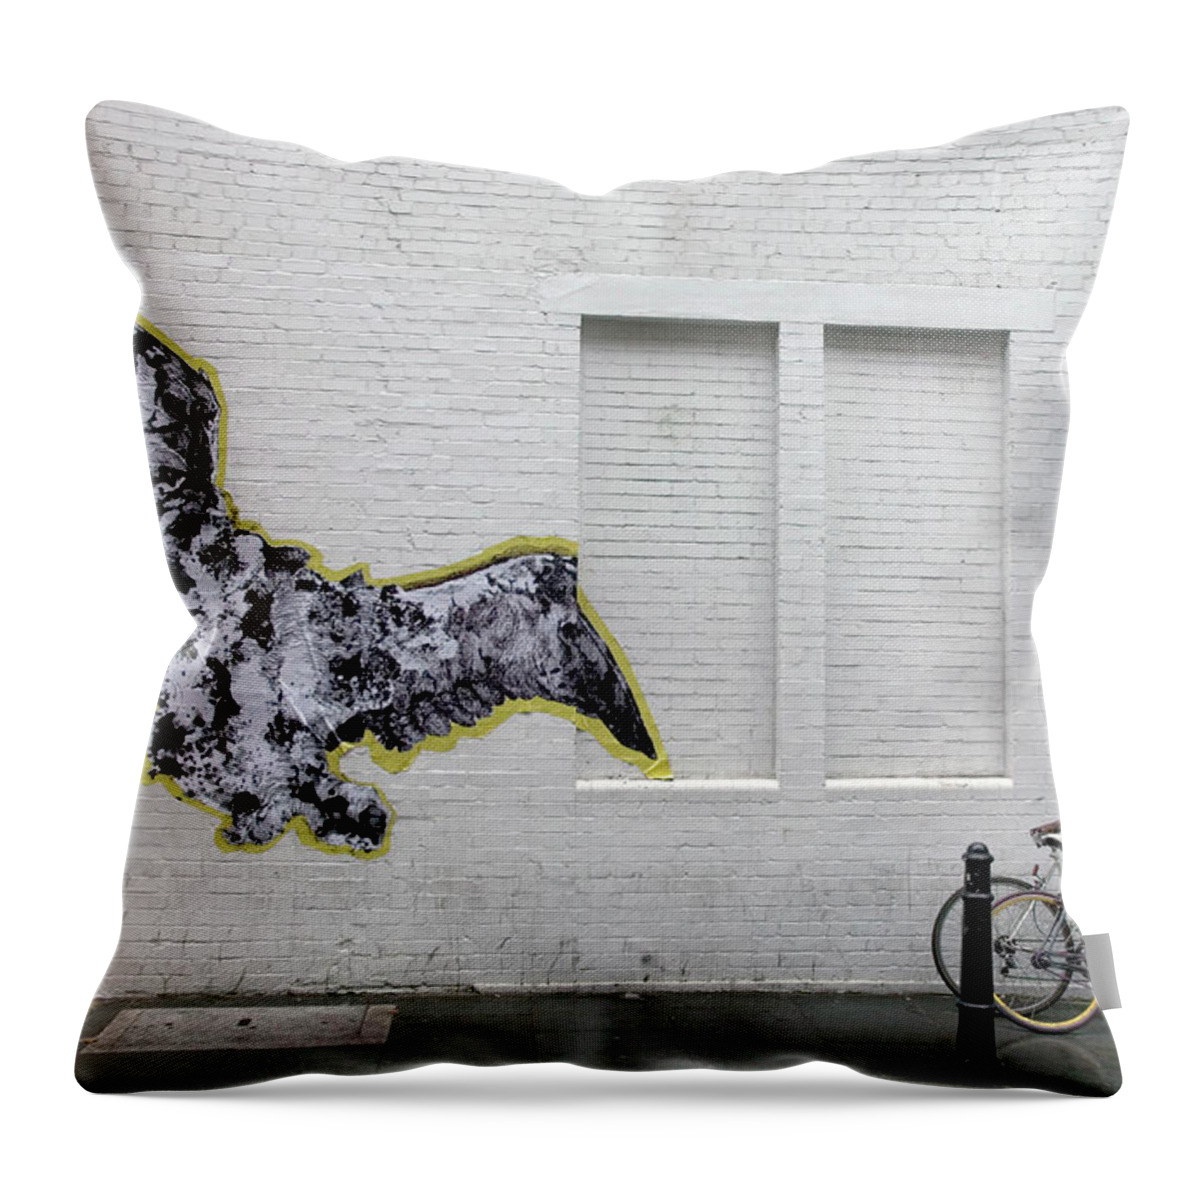 England Throw Pillow featuring the photograph White Cube Gallery And Outdoor Art by Lonely Planet